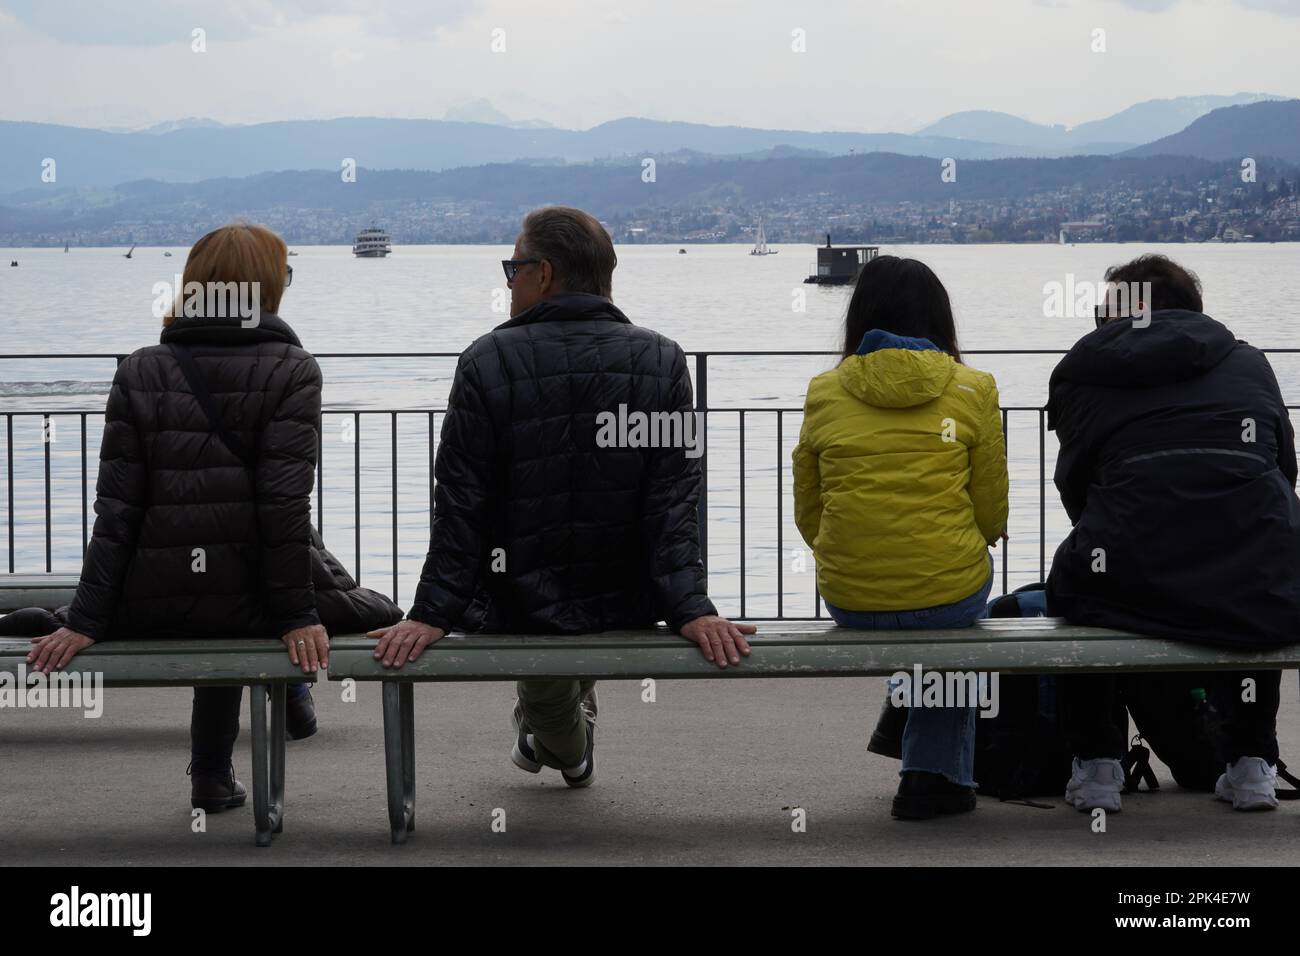 Two heterosexual couples sitting on a bench on the shore of lake Zurich. Rear view with the lake and Swiss Alps on the background. Stock Photo